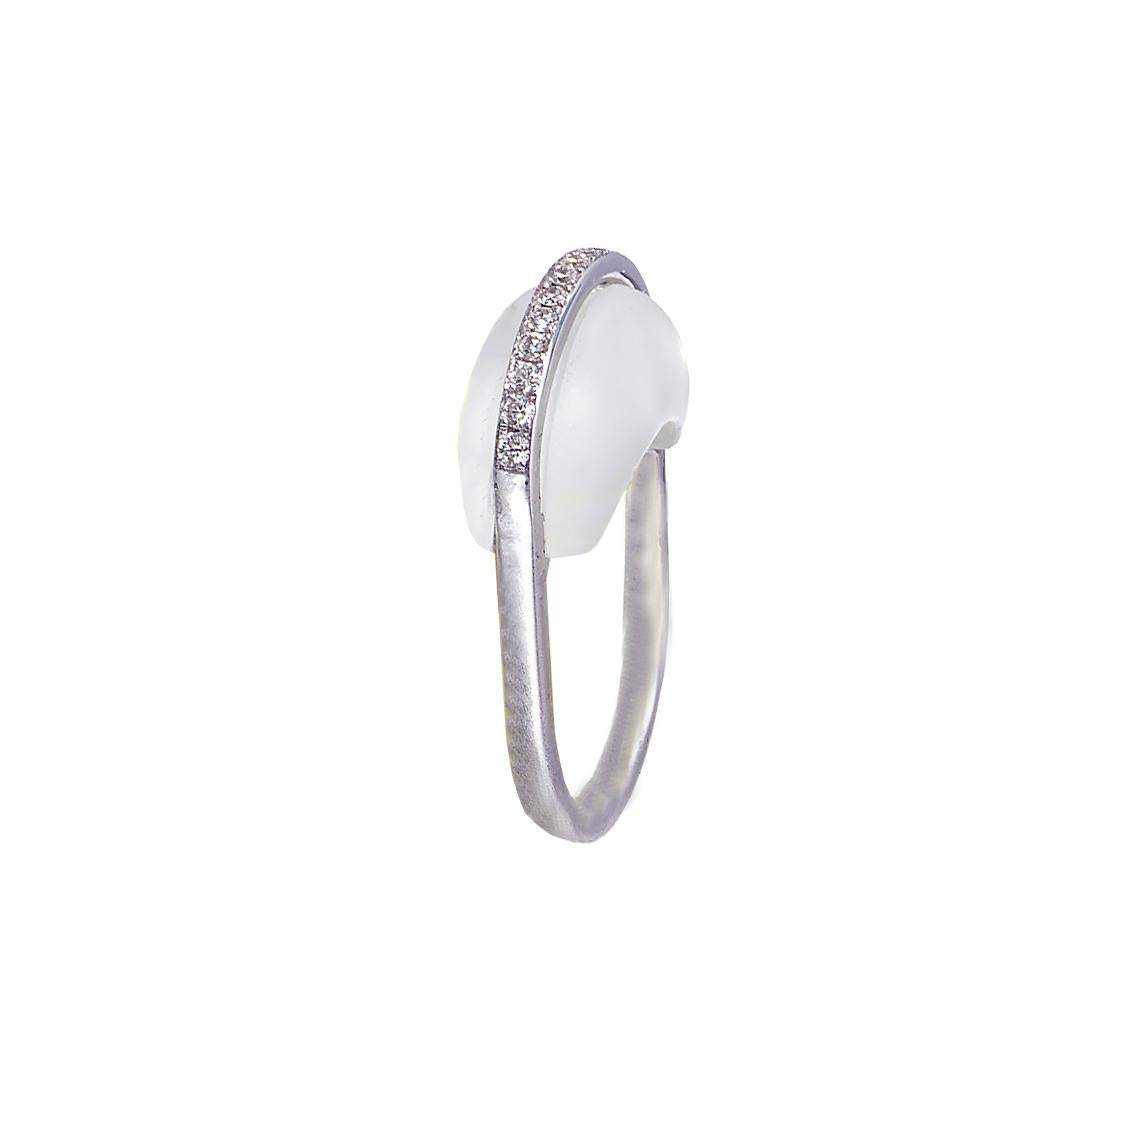 This modern handmade British-London Hallmarked 18 karat white gold ring, set with hand-carved abstract shape rock crystal and highest quality of dimaond is from MAIKO NAGAYAMA's Haute Couture Collection called 